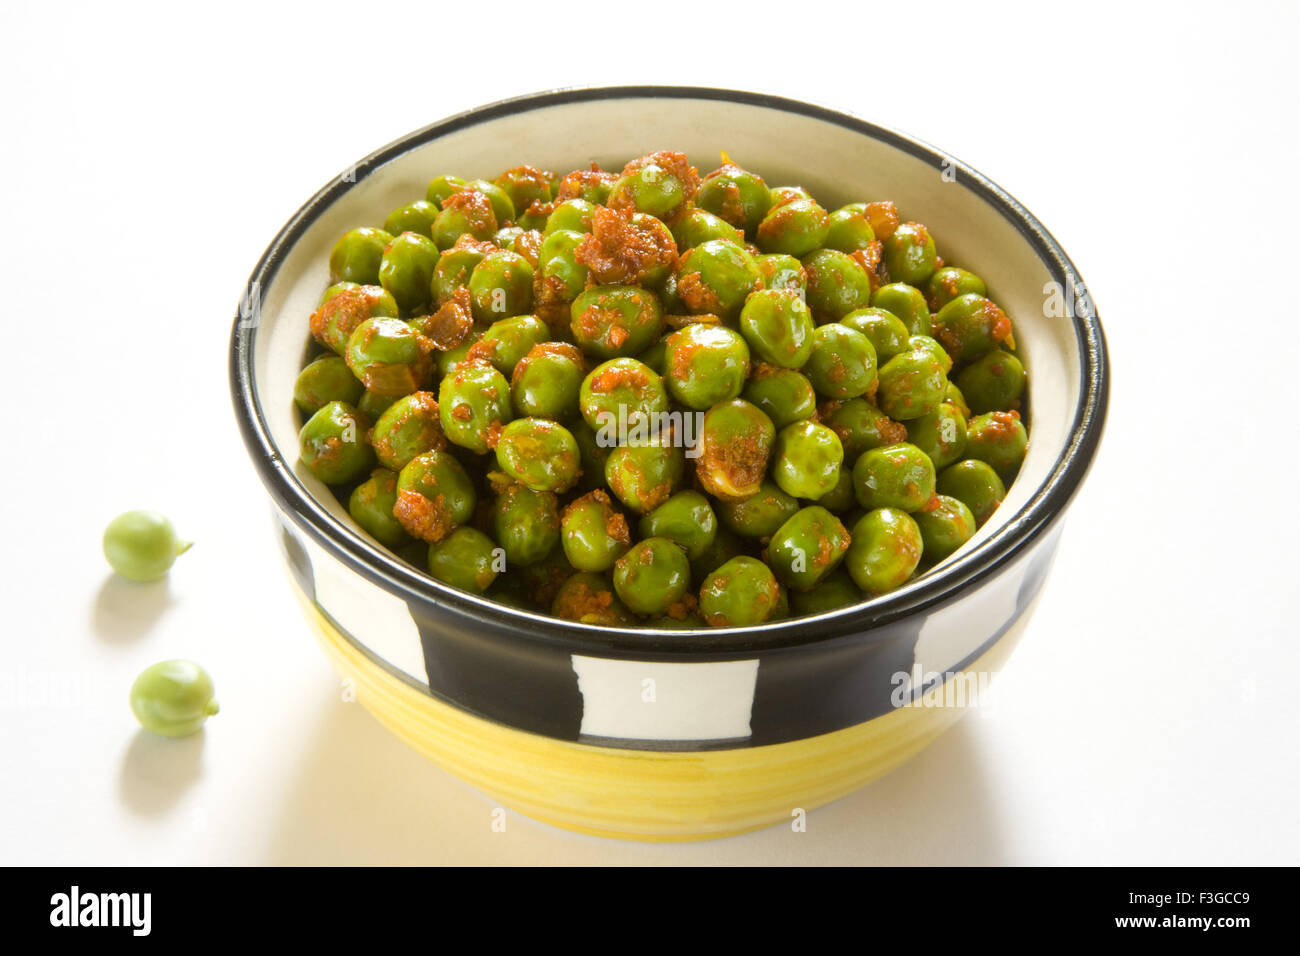 Vegetable green peas mutter Indian cuisine spicy breakfast or snack served in bowls ; India Stock Photo